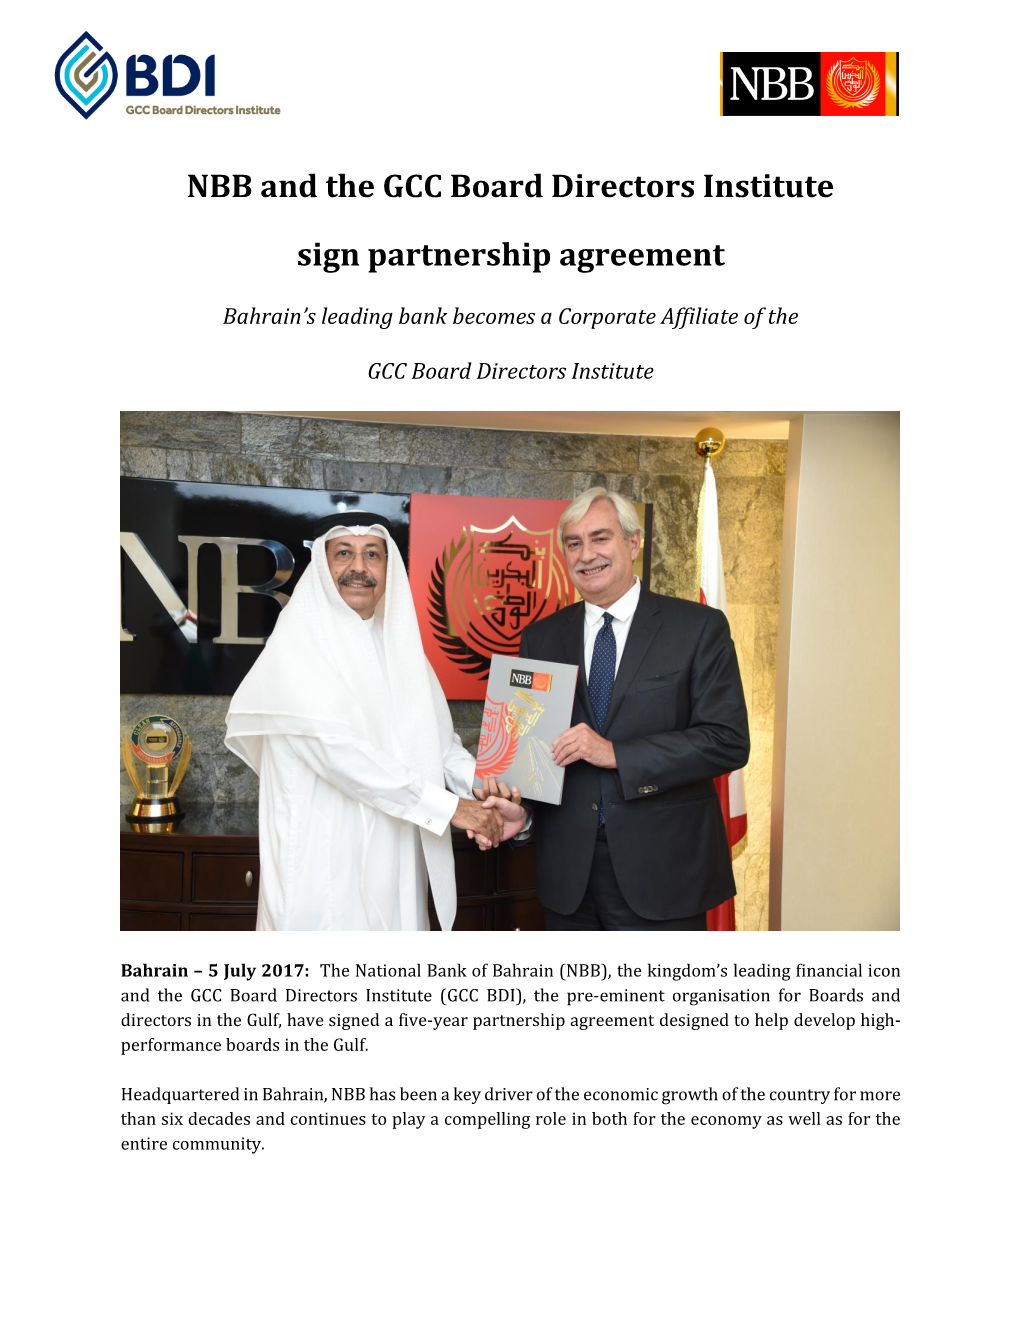 NBB and the GCC Board Directors Institute Sign Partnership Agreement